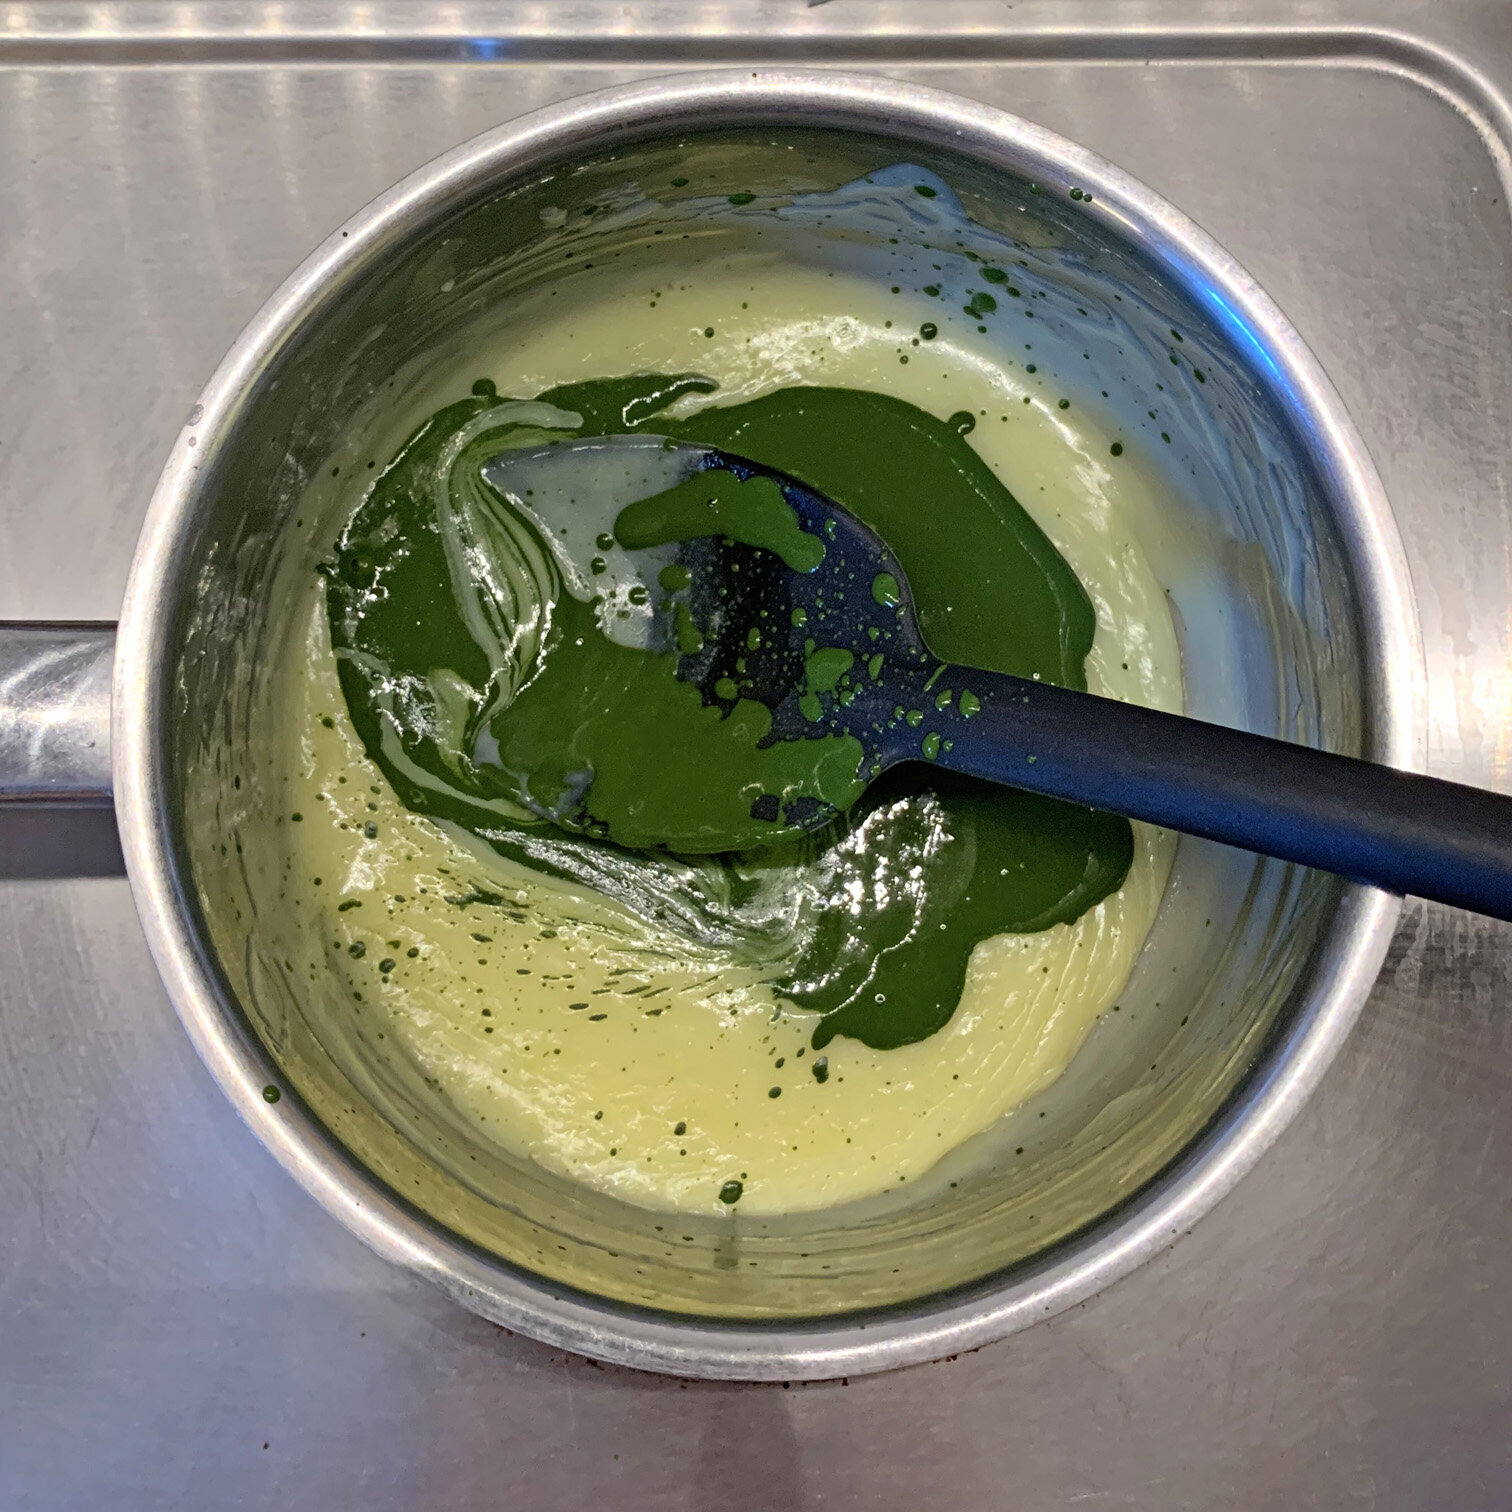 The matcha gives the jam a really deep green color and a delicious taste.